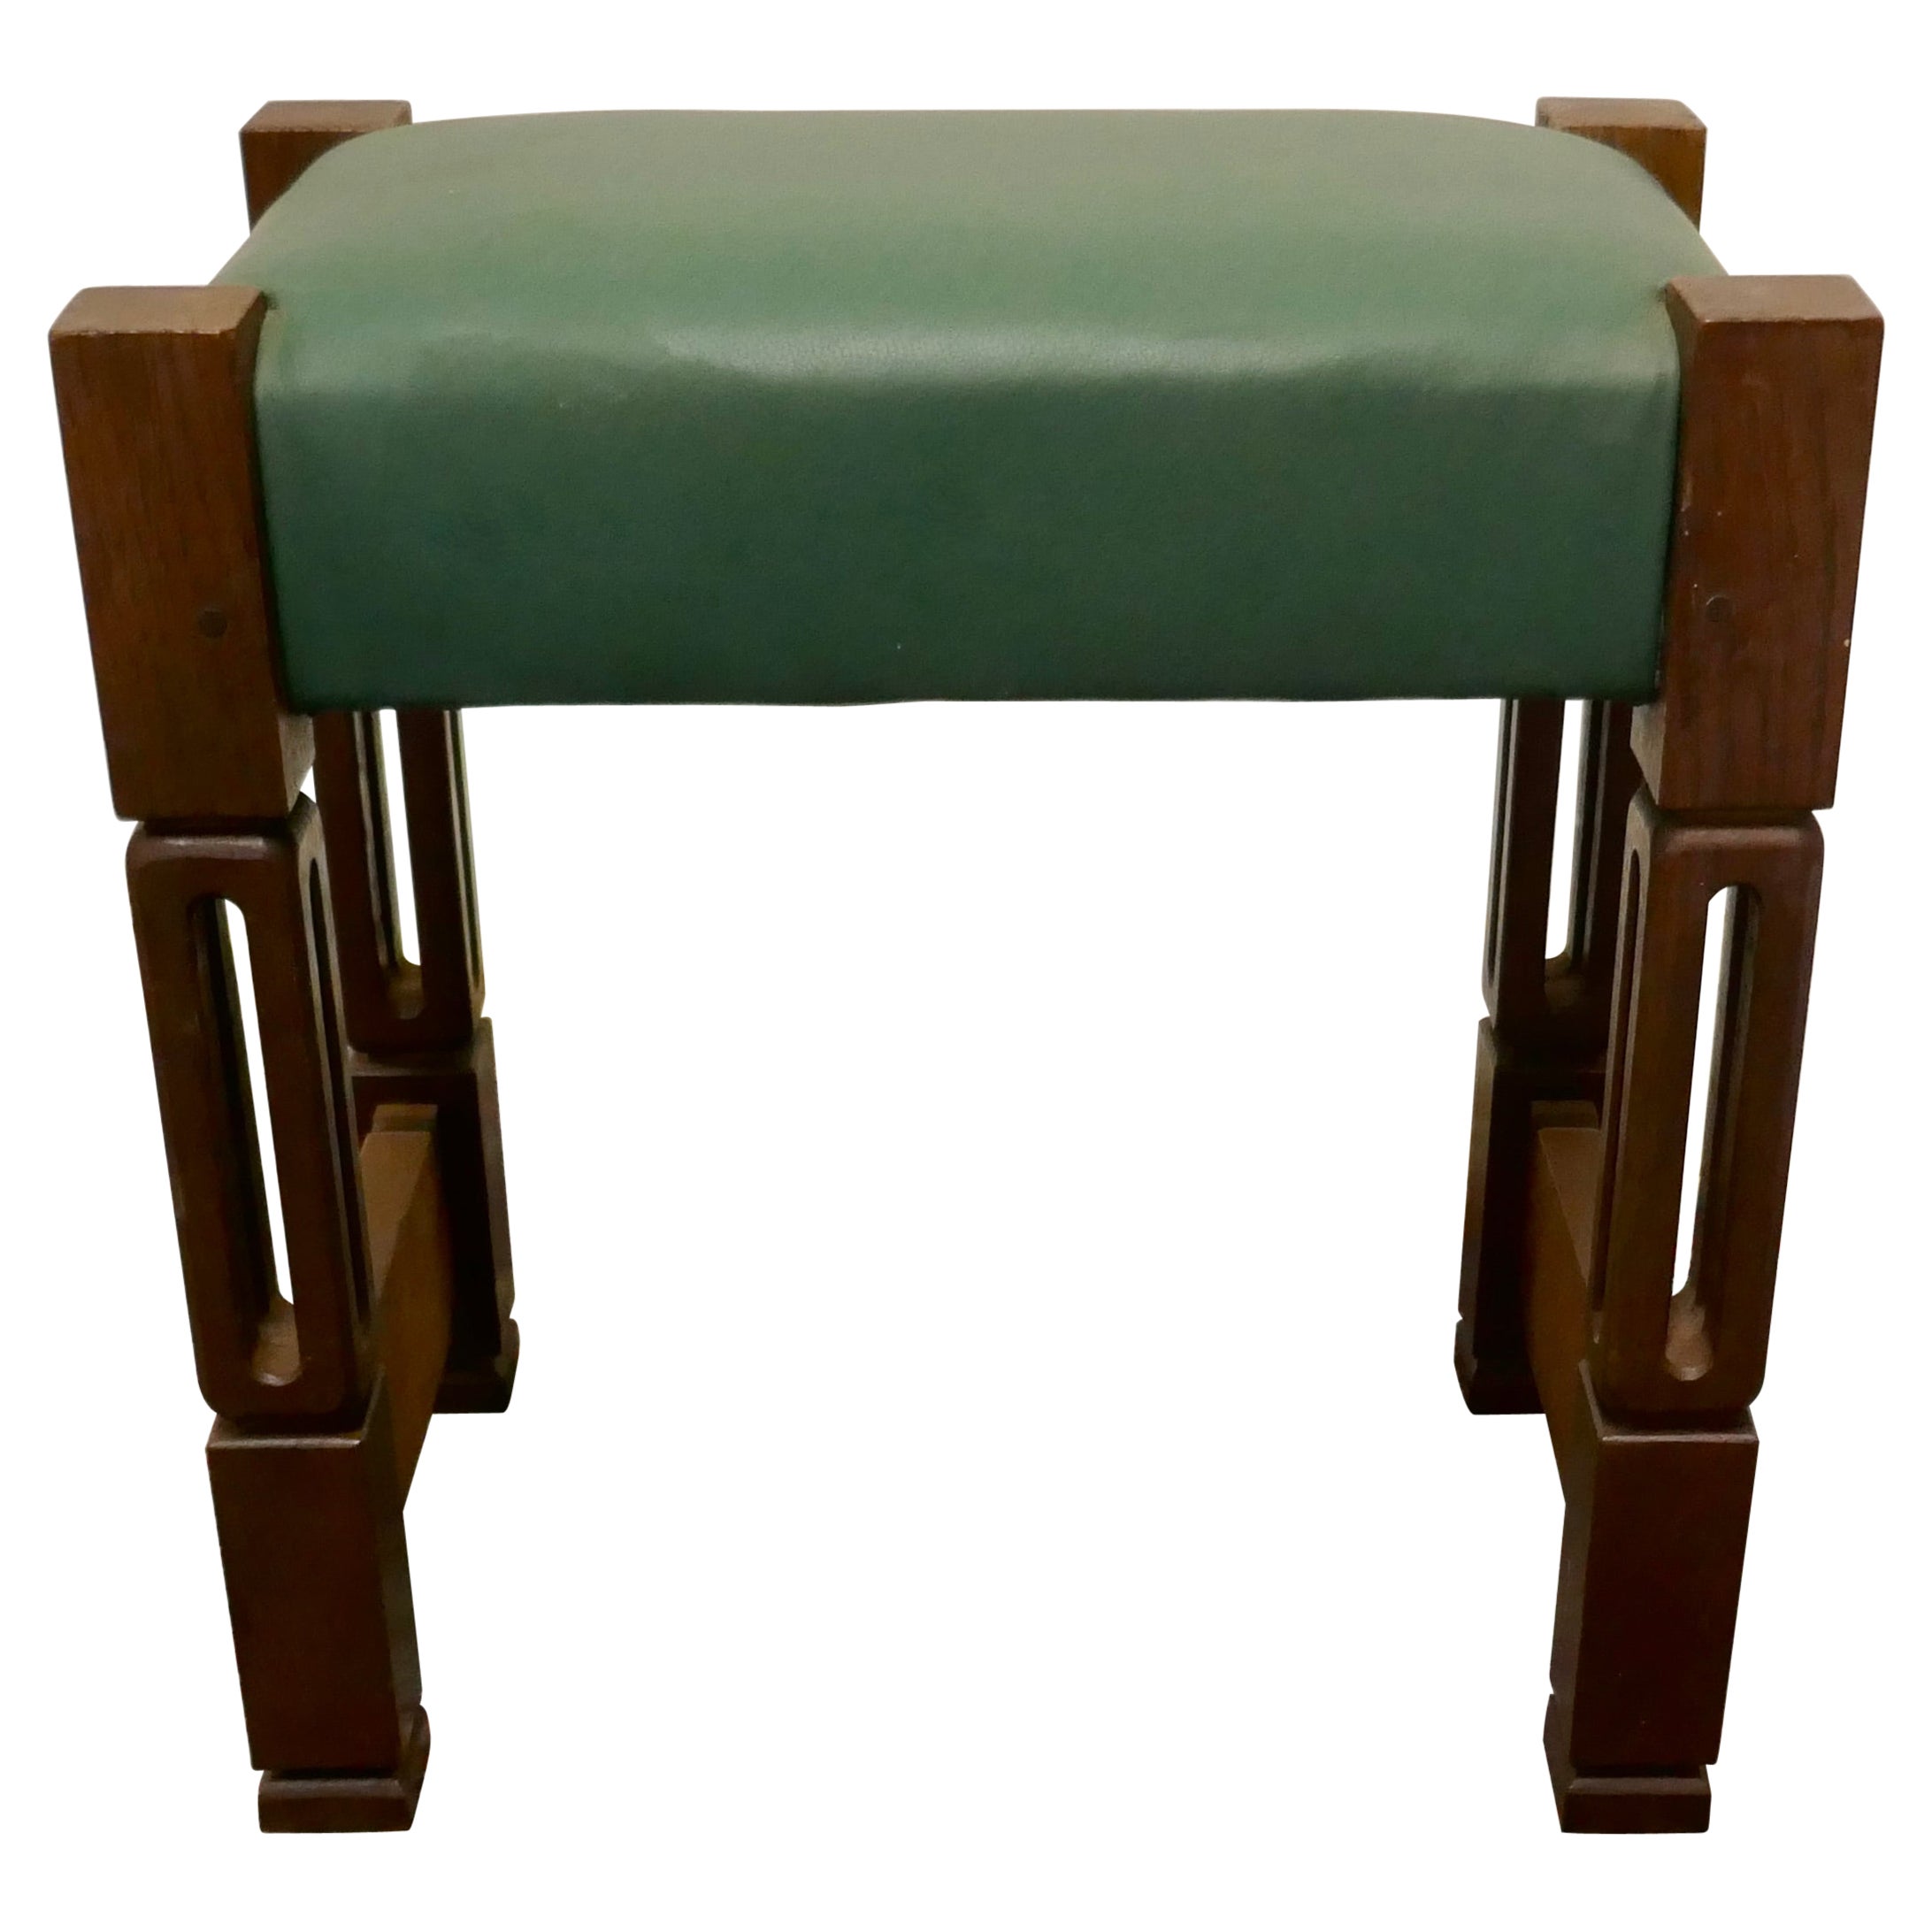 Stylish Arts and Crafts Oak and Leather Stool